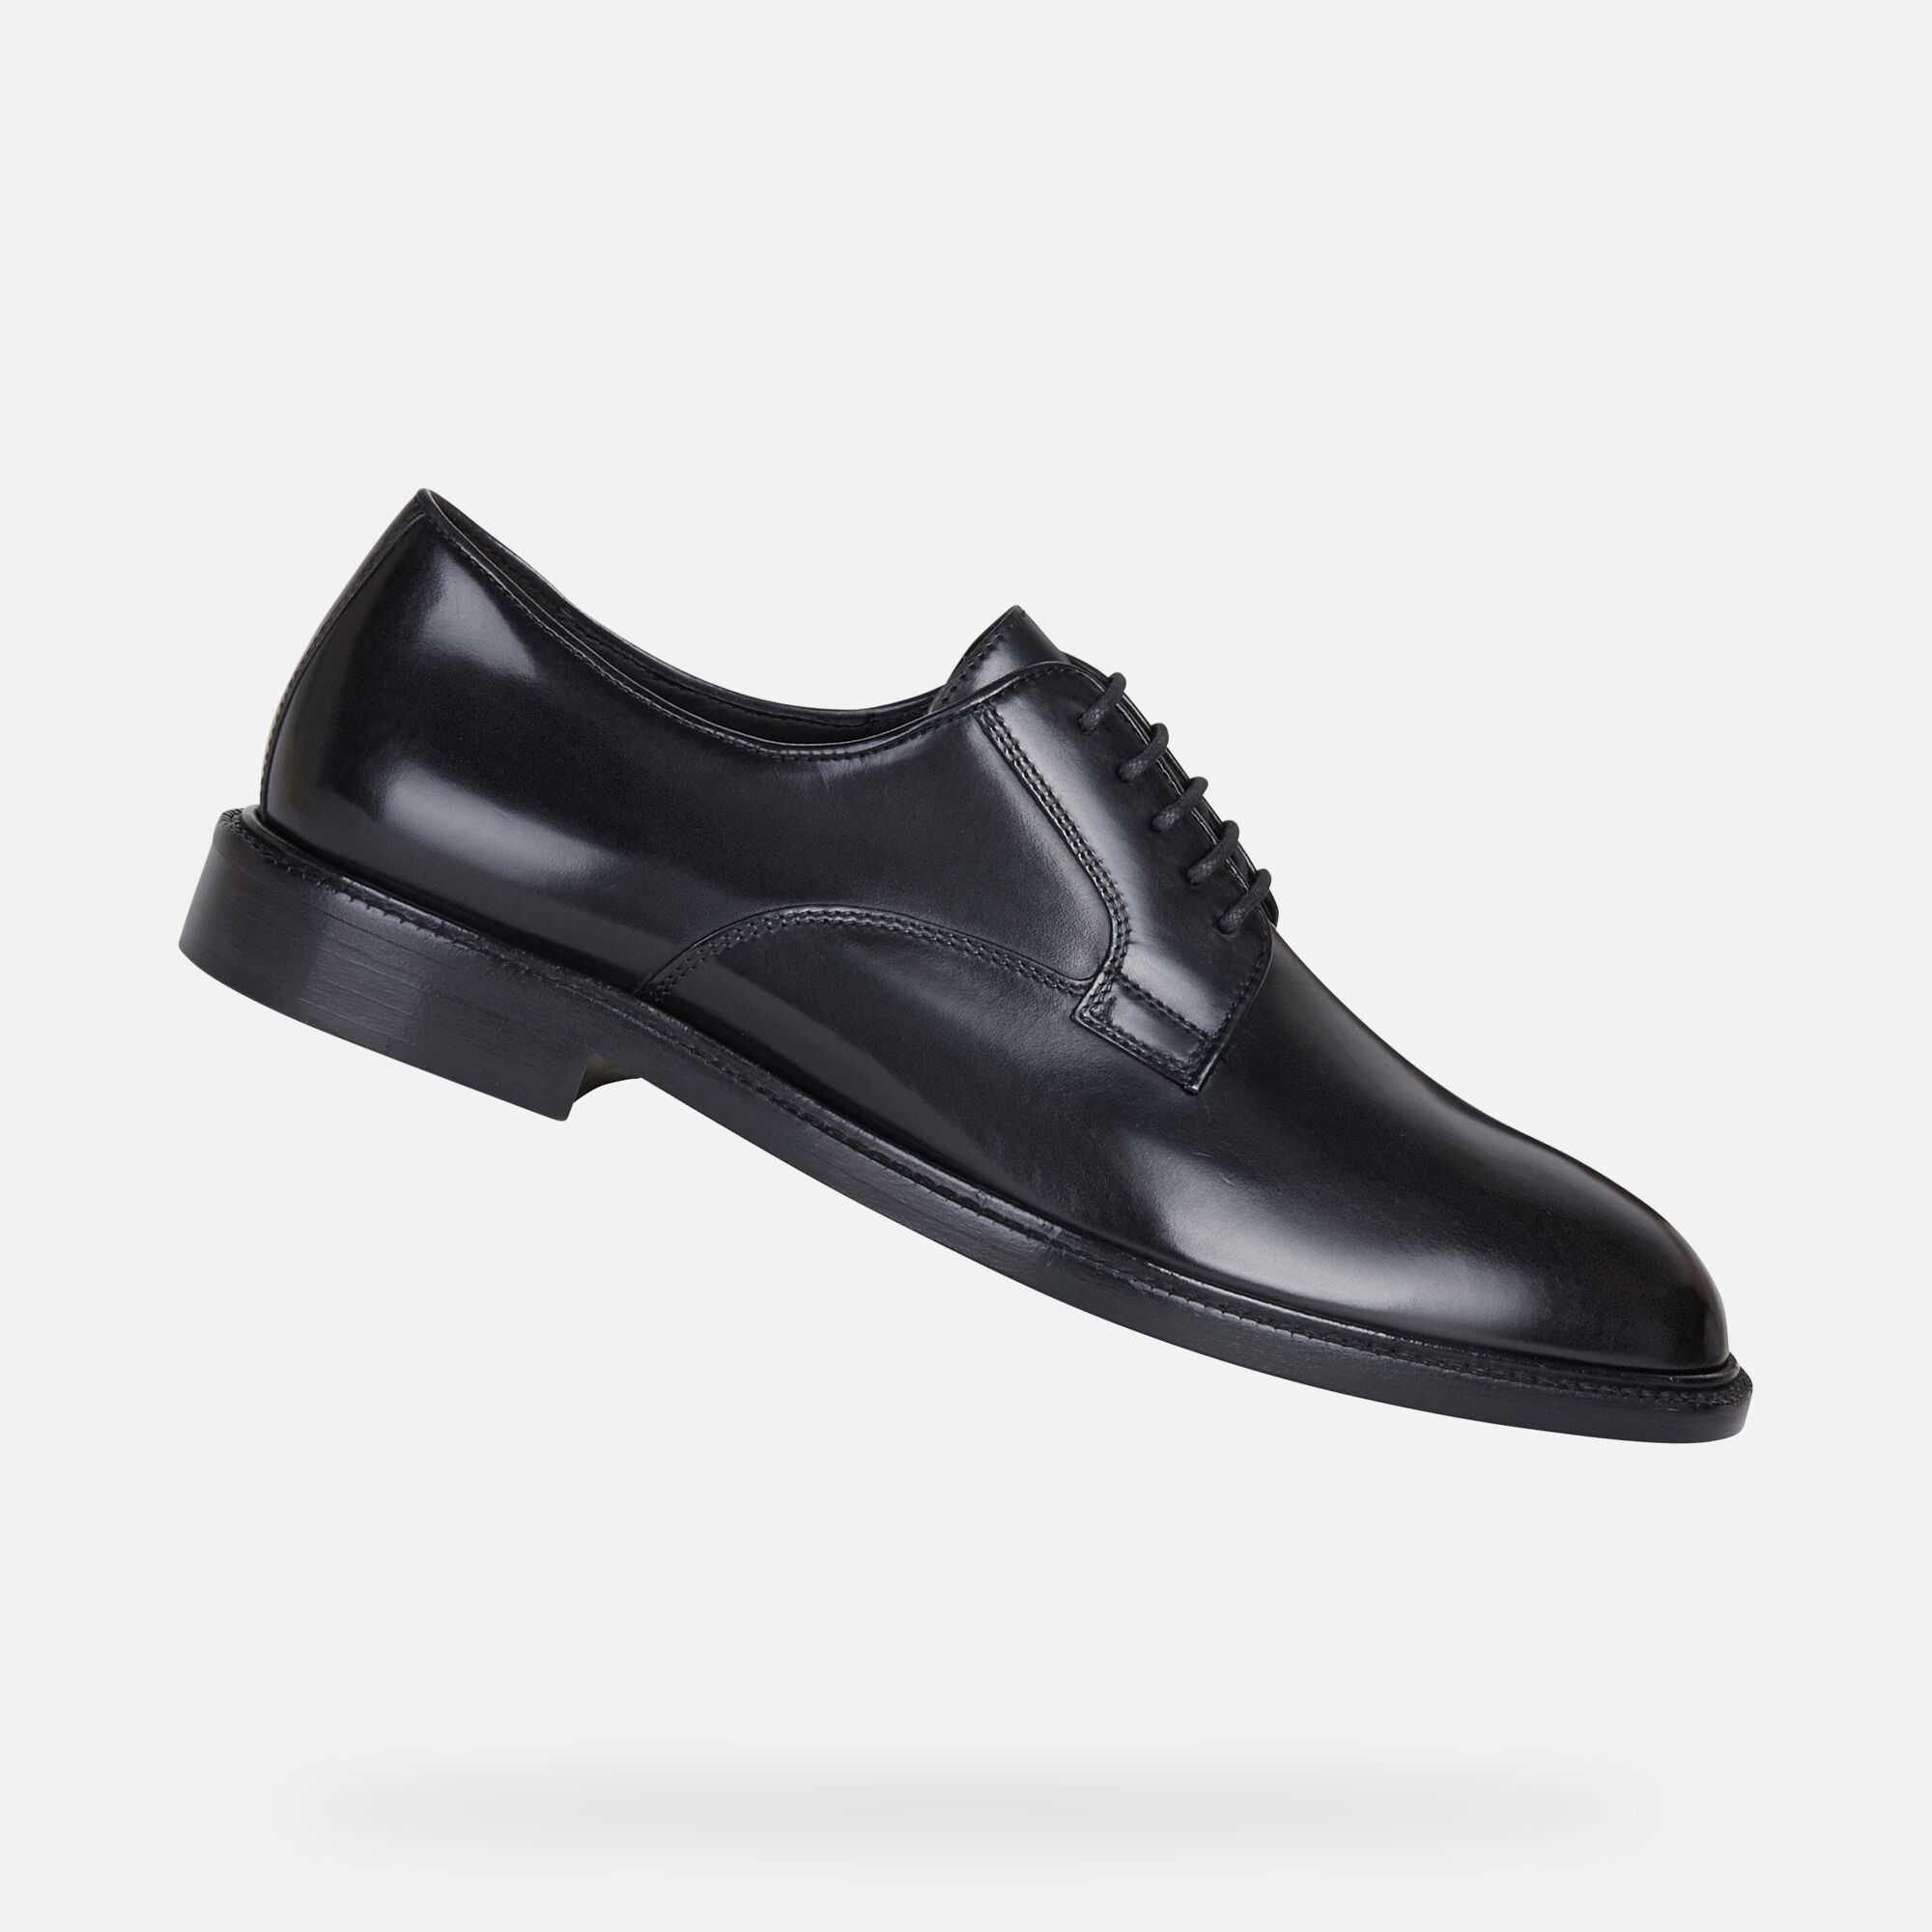 geox formal shoes price